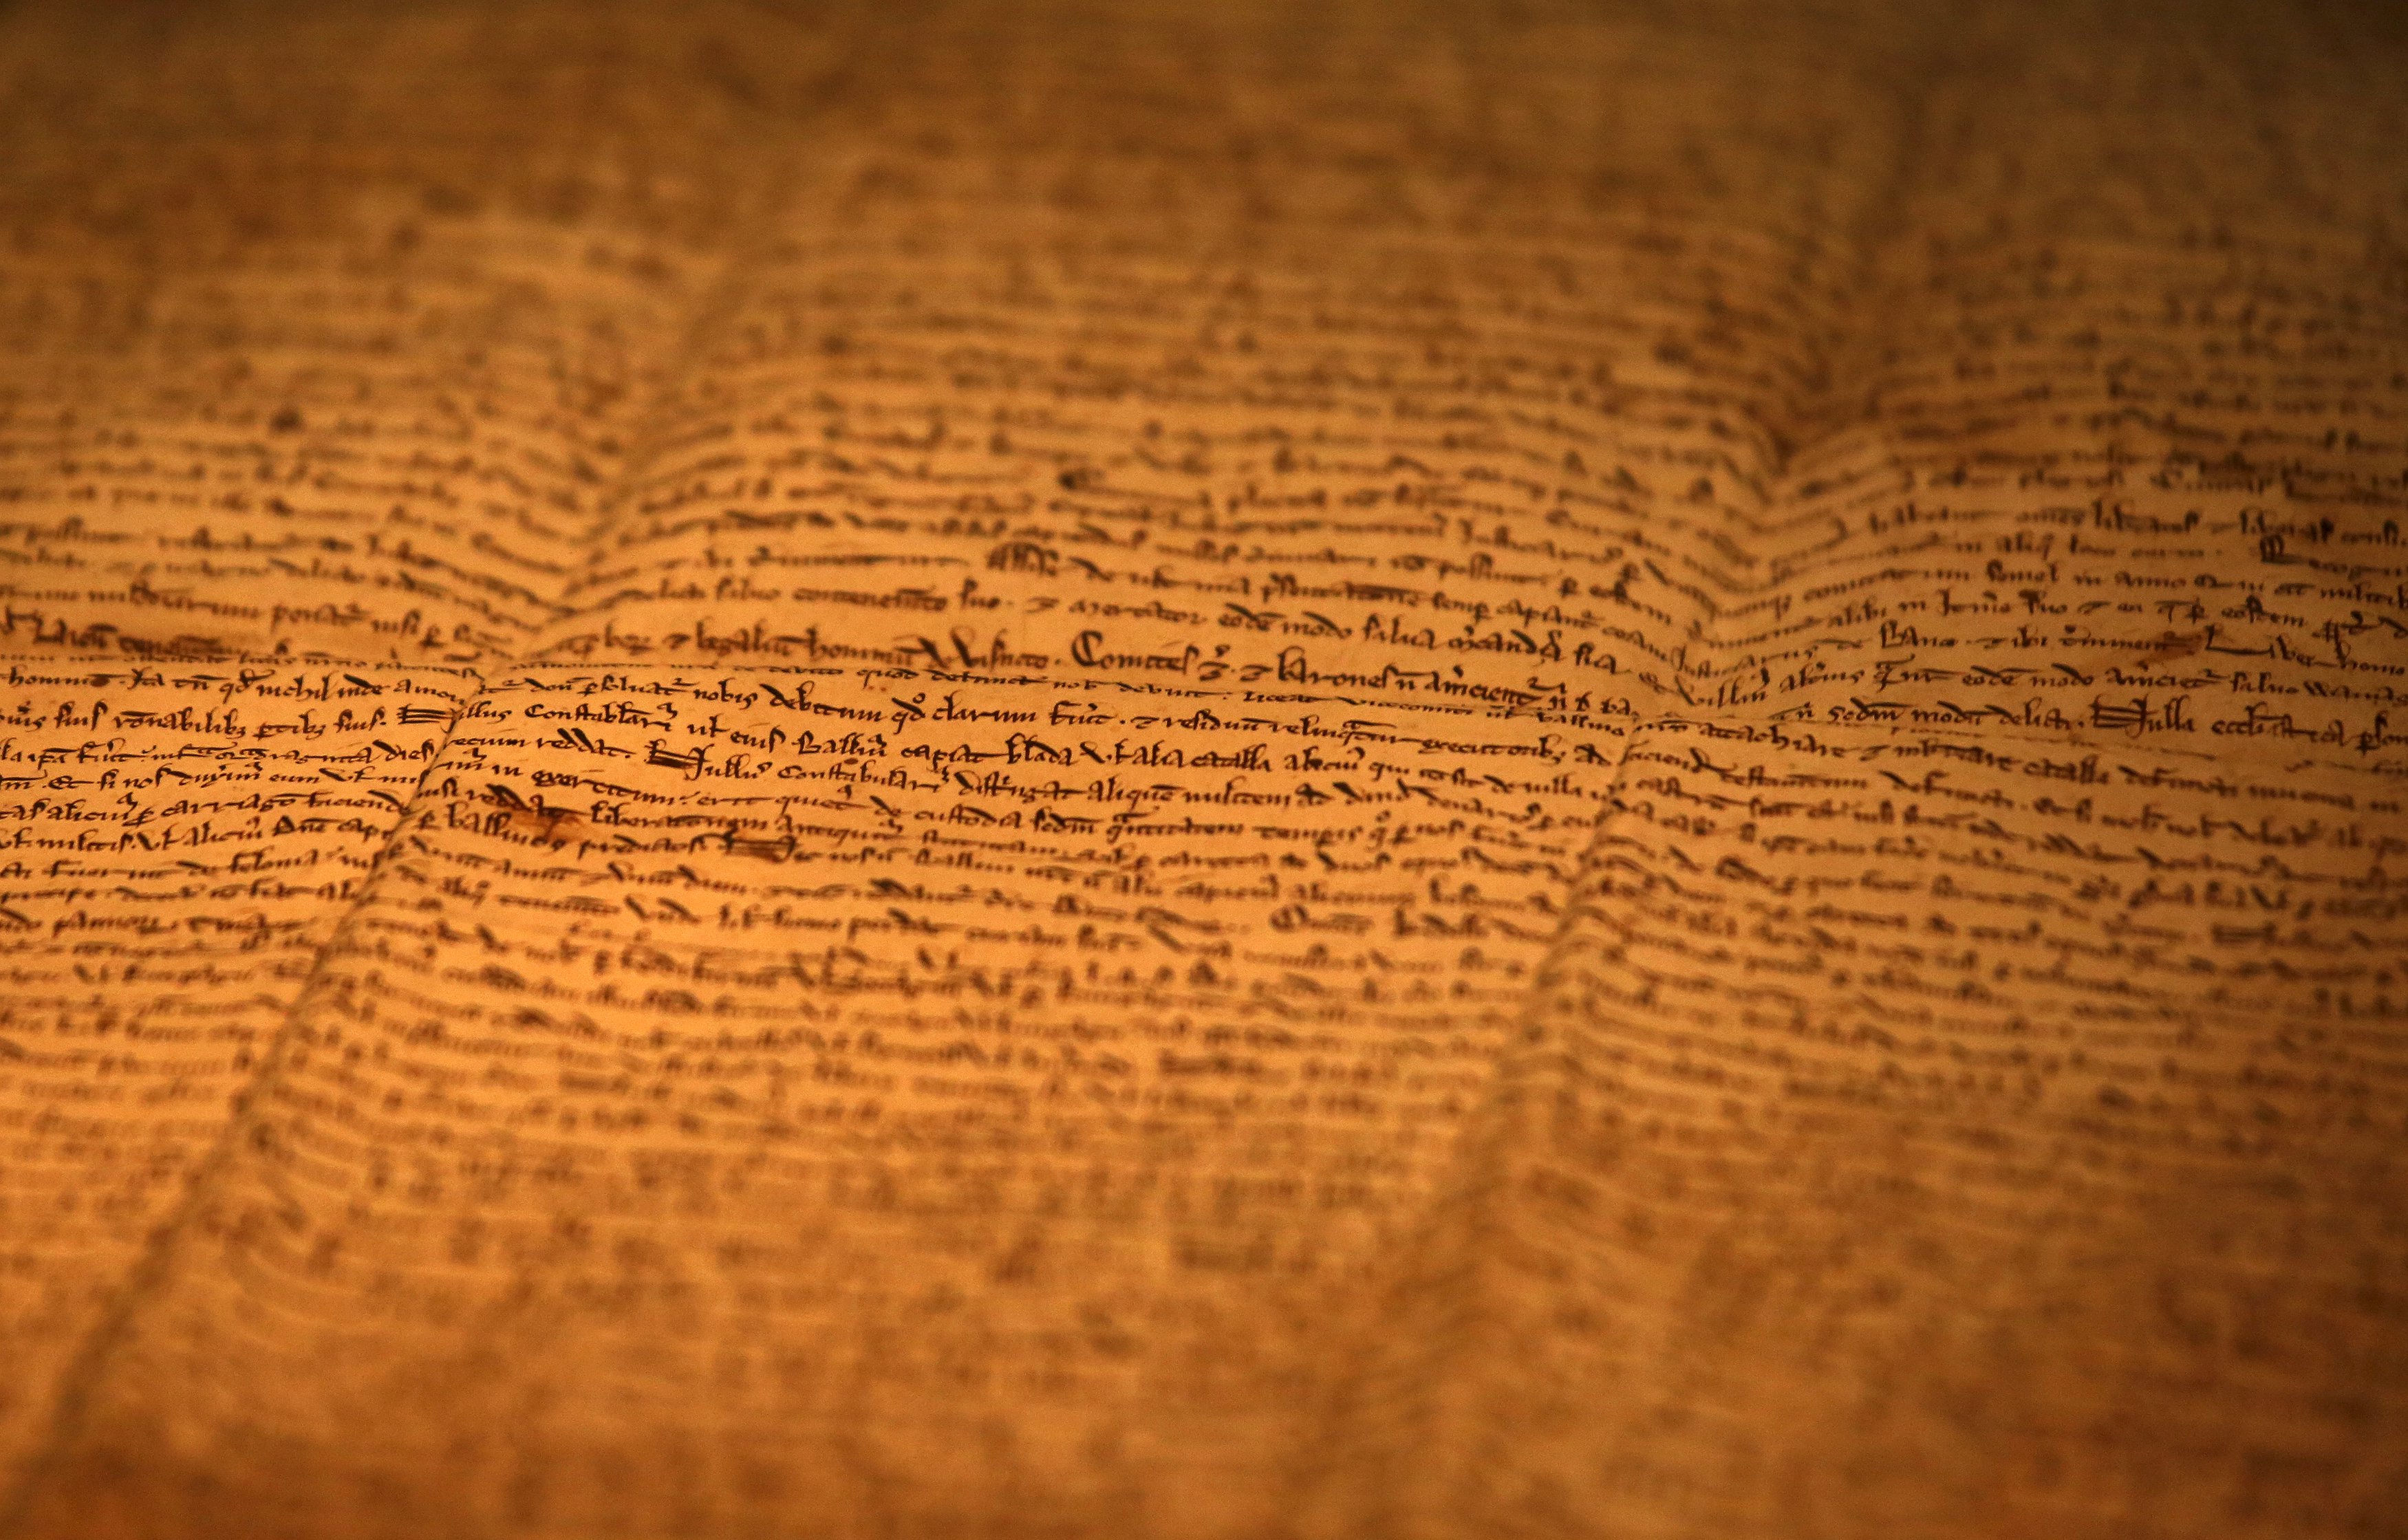 One of the few surviving copies of Magna Carta, Latin for "The Great Charter" written in 1217 on sheep skin is displayed at an exhibition in Hong Kong, China, November 10, 2015. The exhibition is part of a worldwide celebrations of its 800th anniversary, British Consulate in Hong Kong said. REUTERS/Bobby Yip